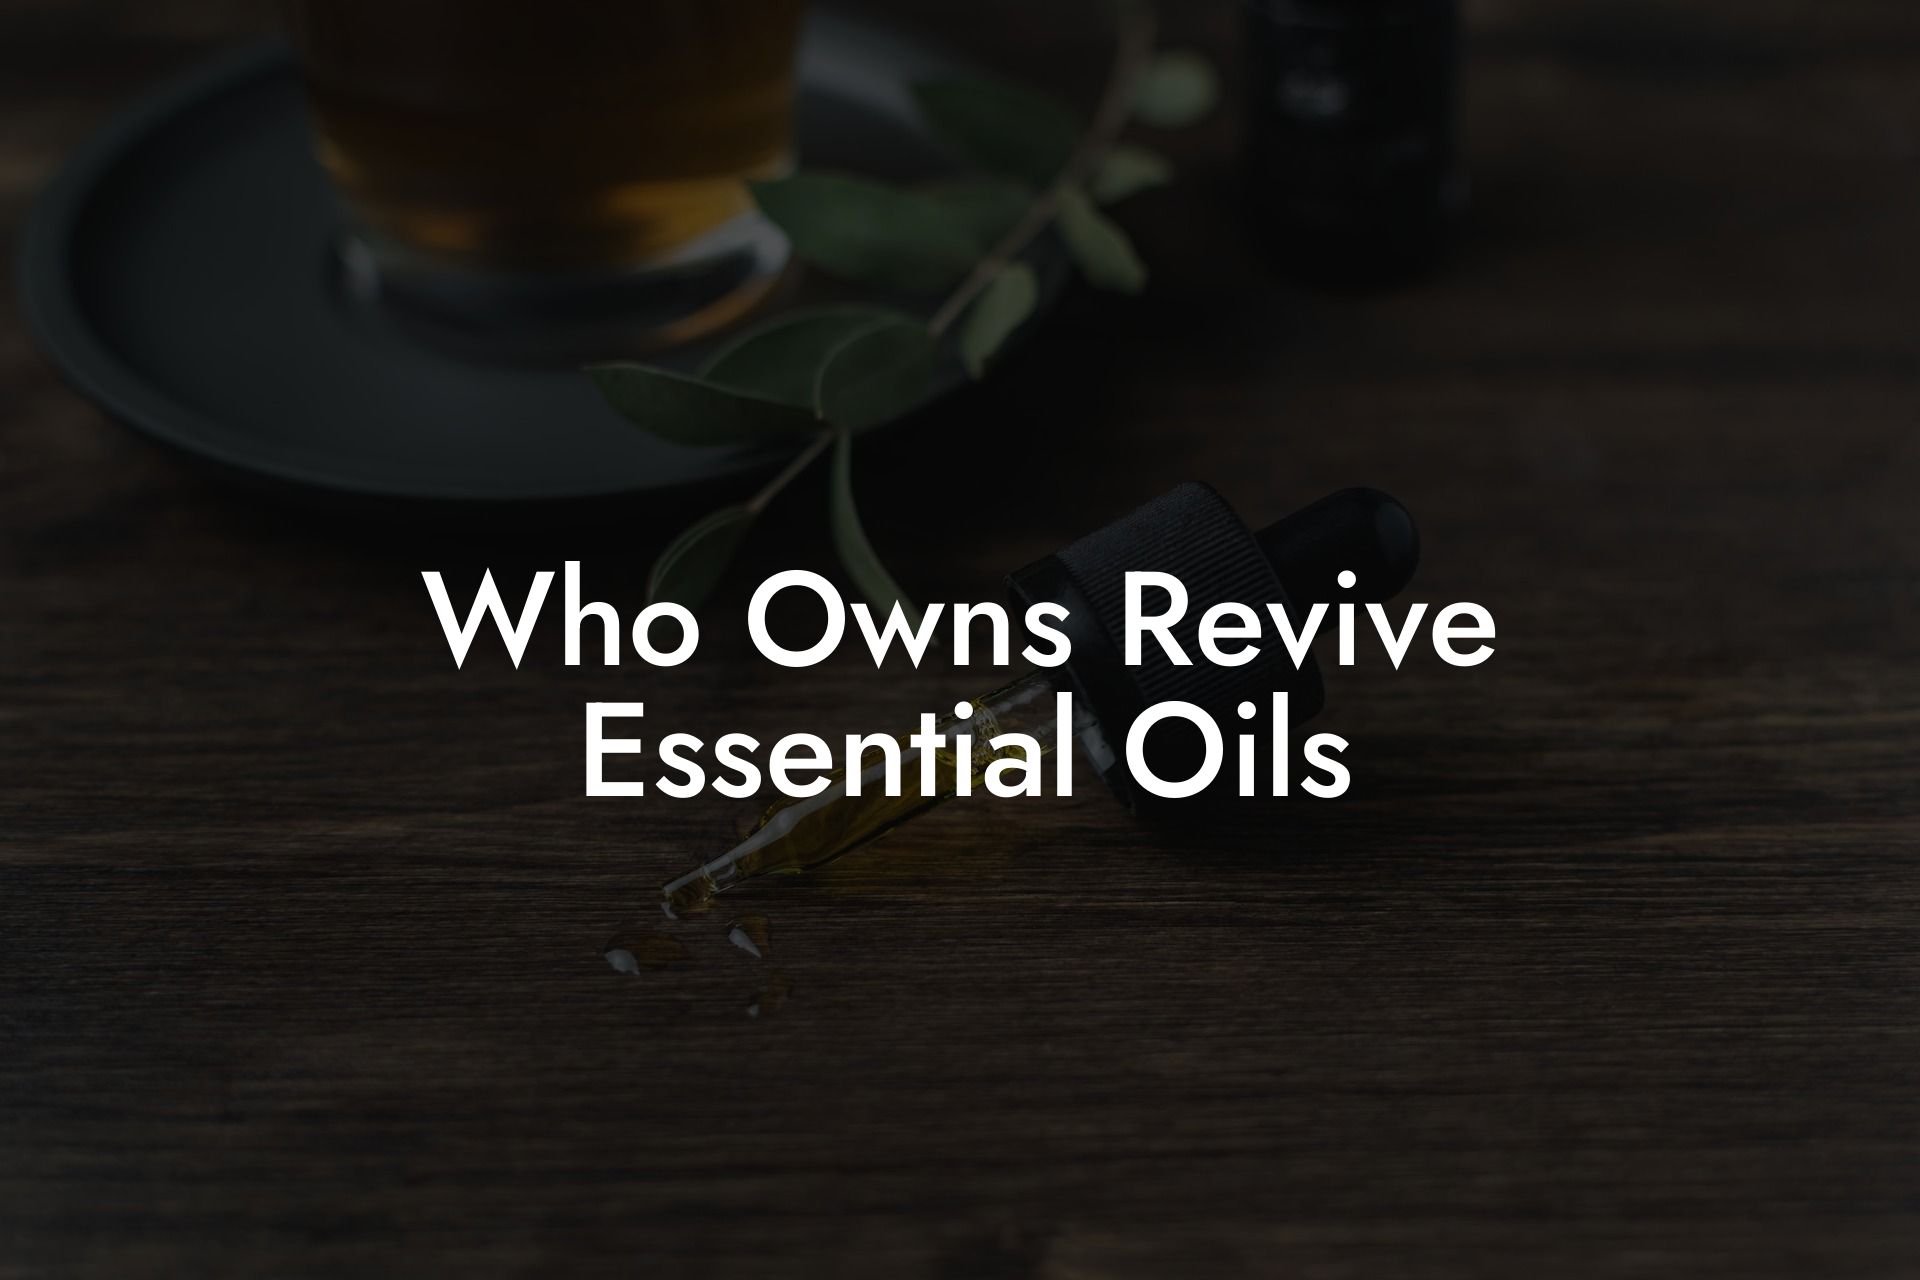 Who Owns Revive Essential Oils